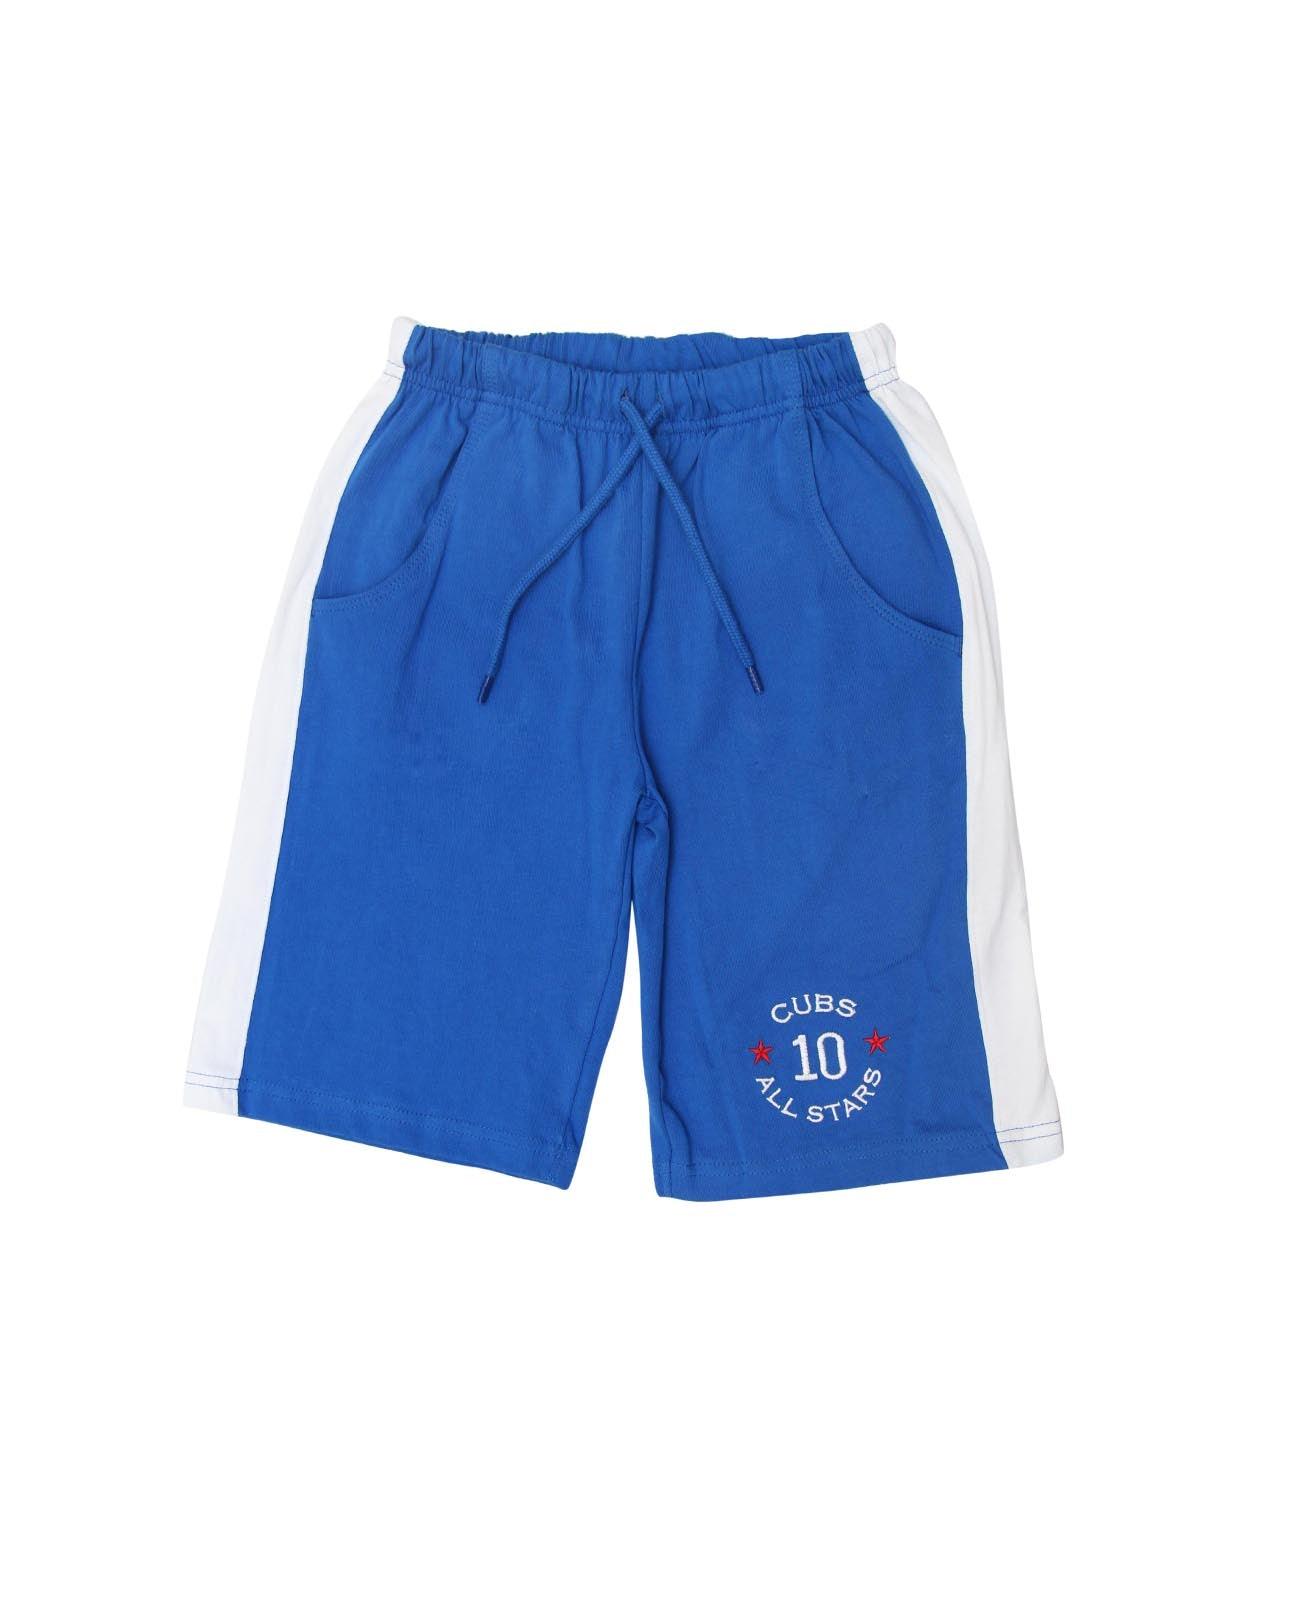 All Star Embroidery Shorts - Juscubs